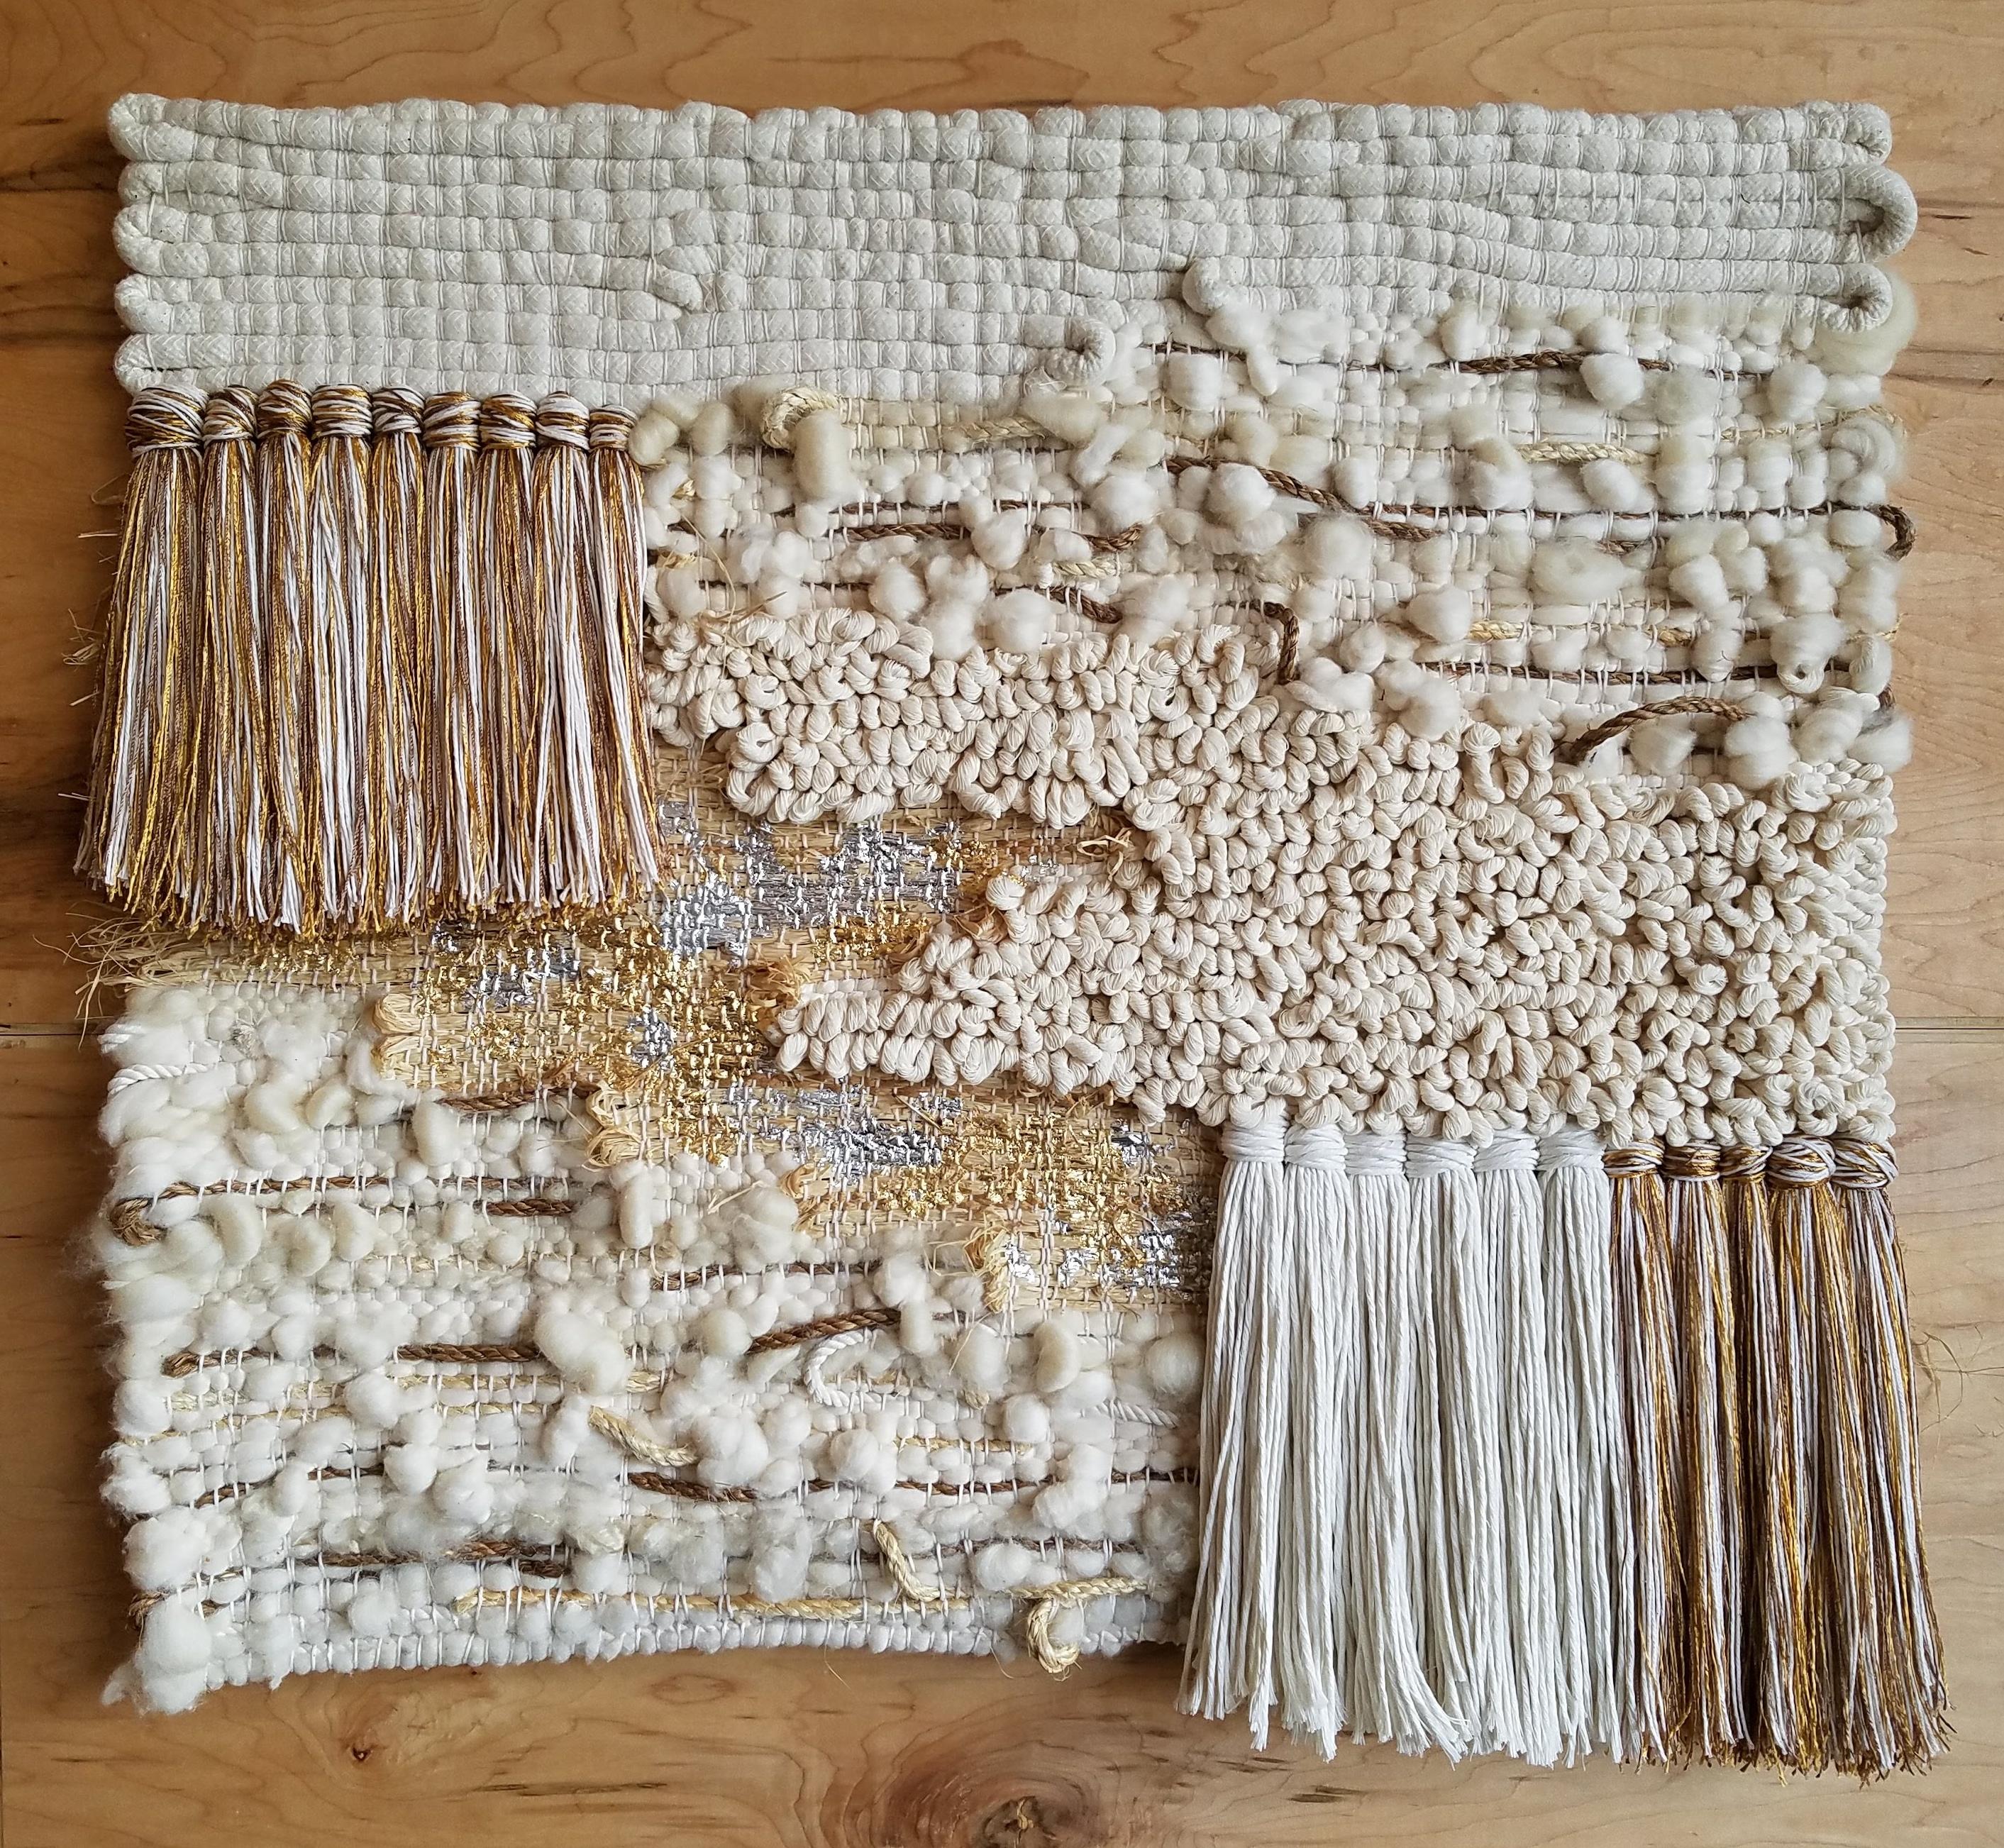 Handwoven, tapestry style, wall hanging by Janelle Pietrzak of All Roads. Neutral colors like cream, tan and brown are mixed with silver and gold metallics and various types of ropes and natural fibers are used in this textile. Gold/silver leafing